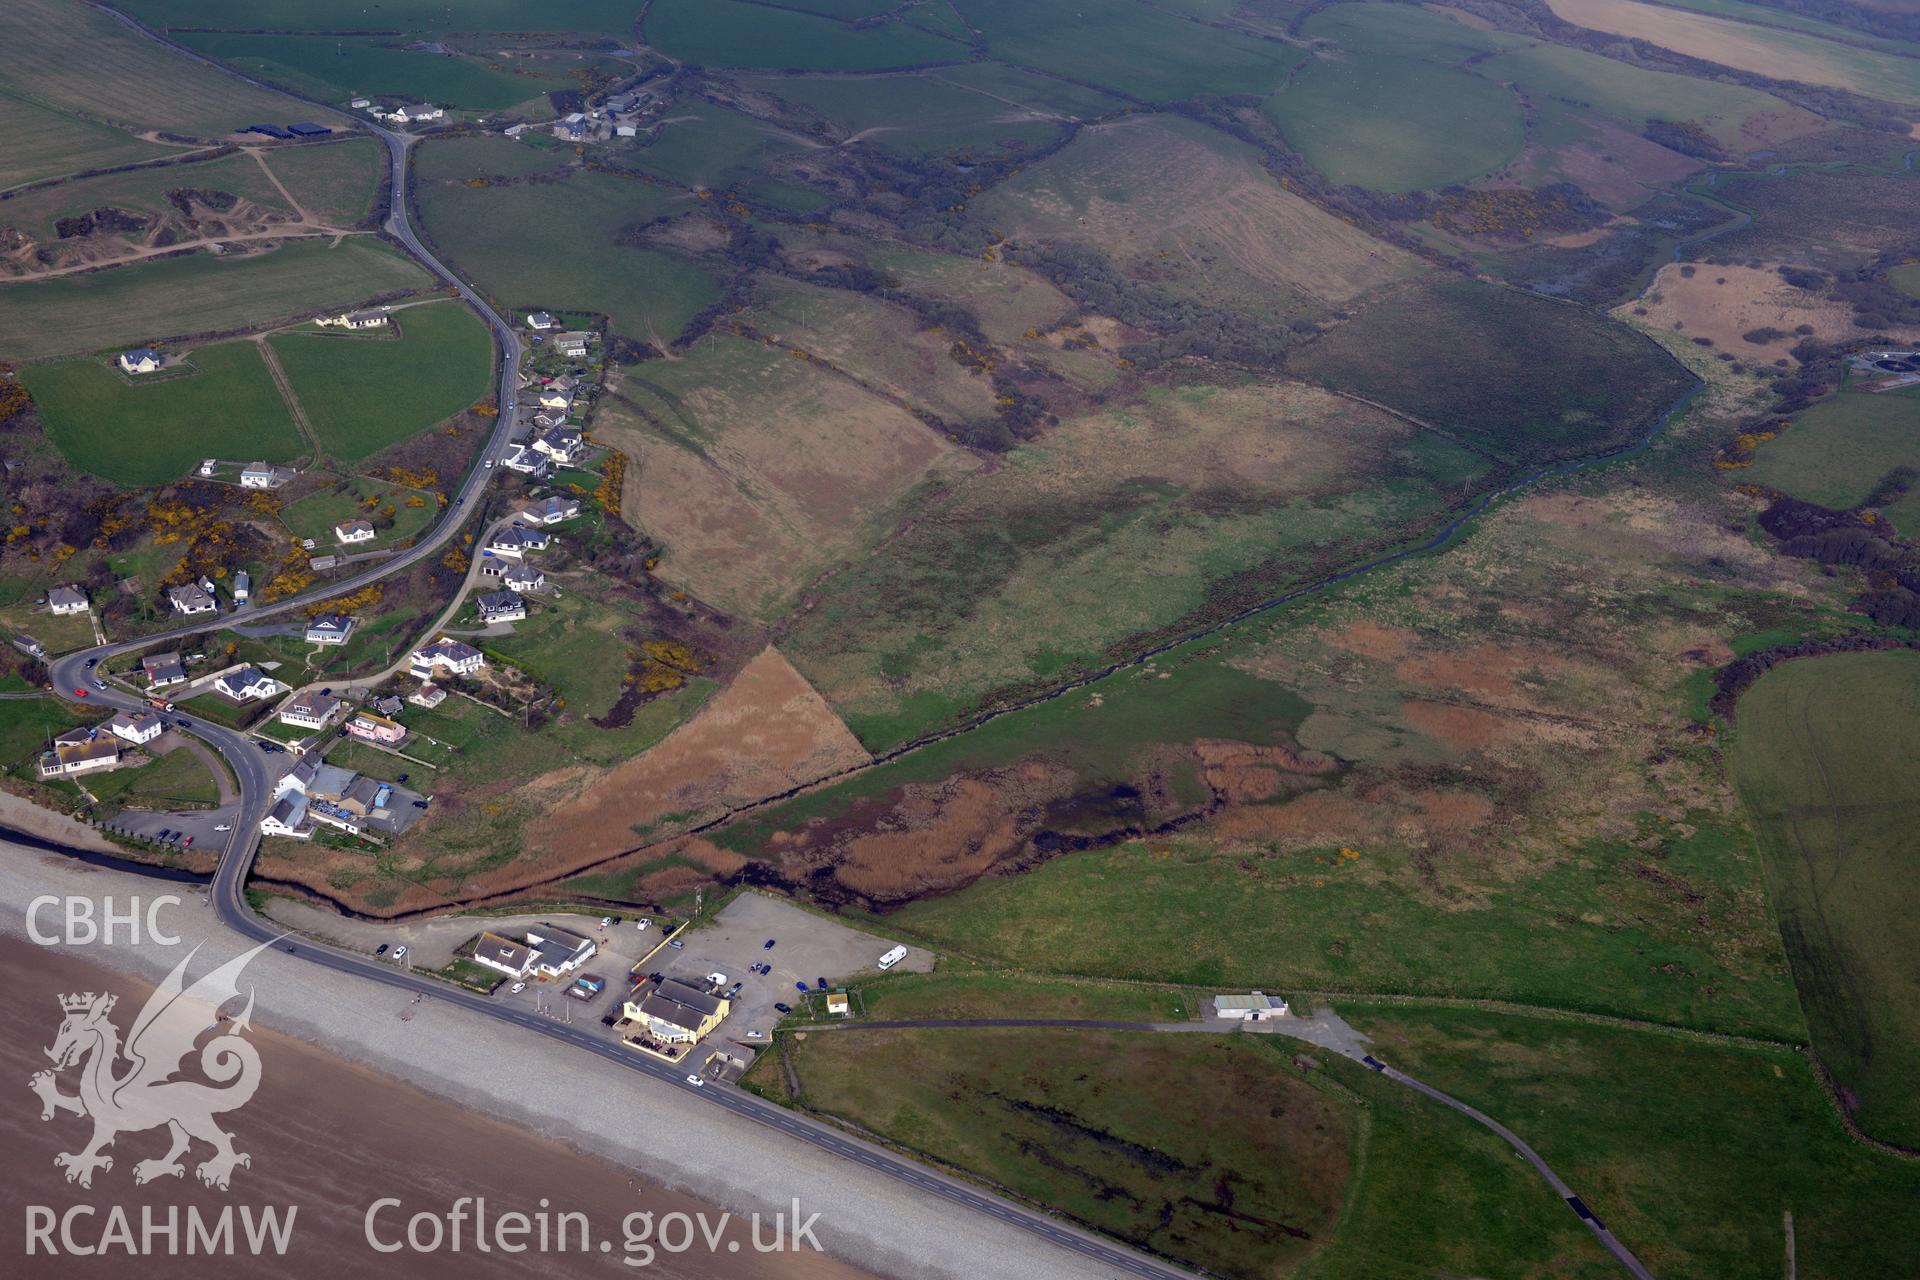 Aerial photography of Newgale taken on 27th March 2017. Baseline aerial reconnaissance survey for the CHERISH Project. ? Crown: CHERISH PROJECT 2019. Produced with EU funds through the Ireland Wales Co-operation Programme 2014-2020. All material made freely available through the Open Government Licence.